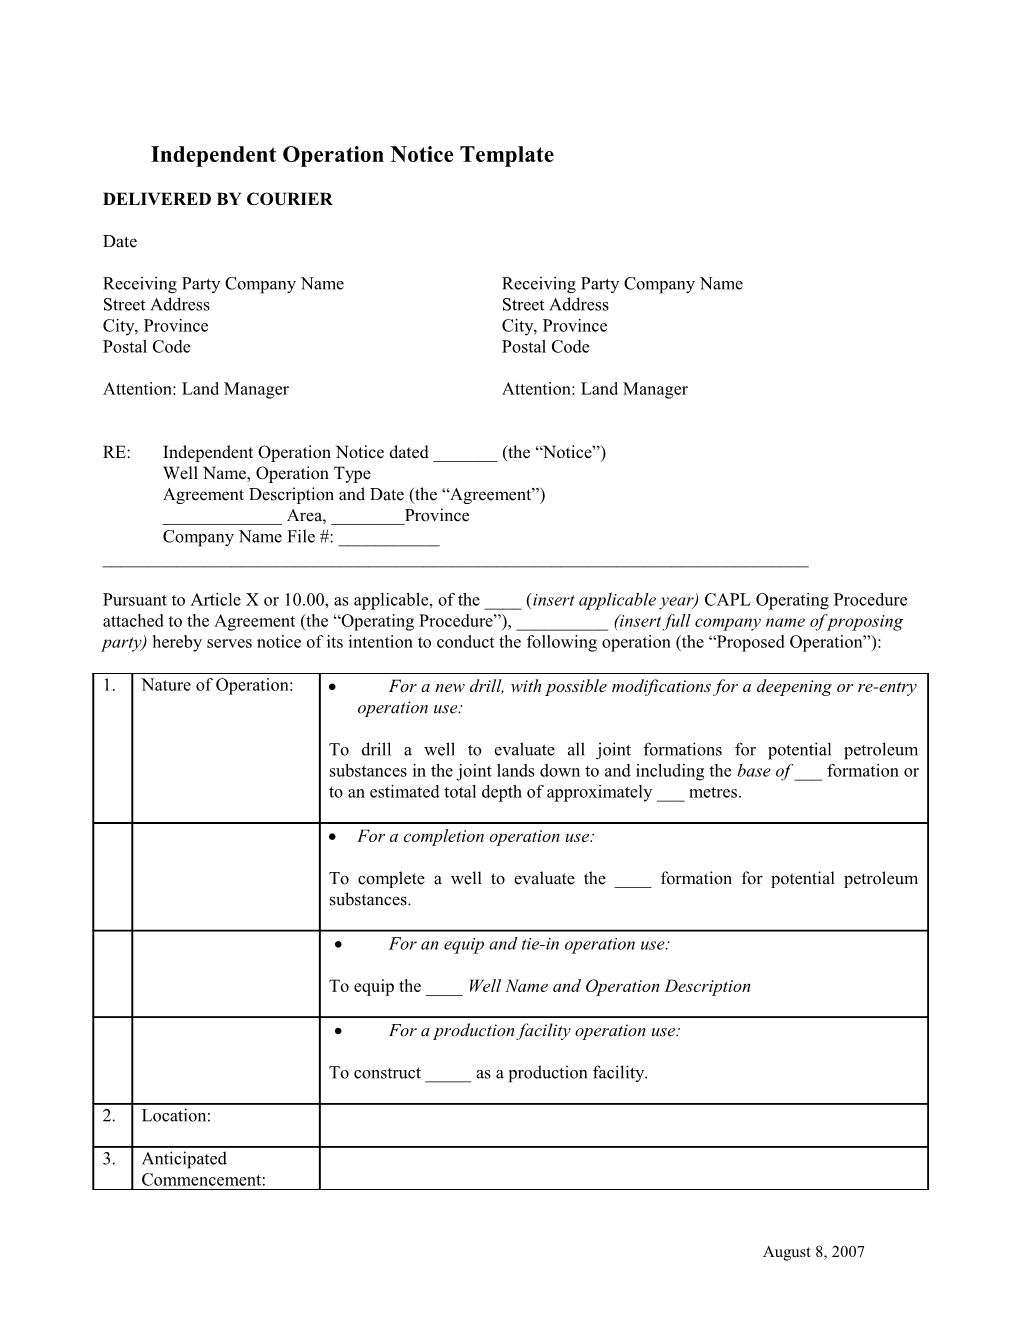 Independent Operation Notice Template